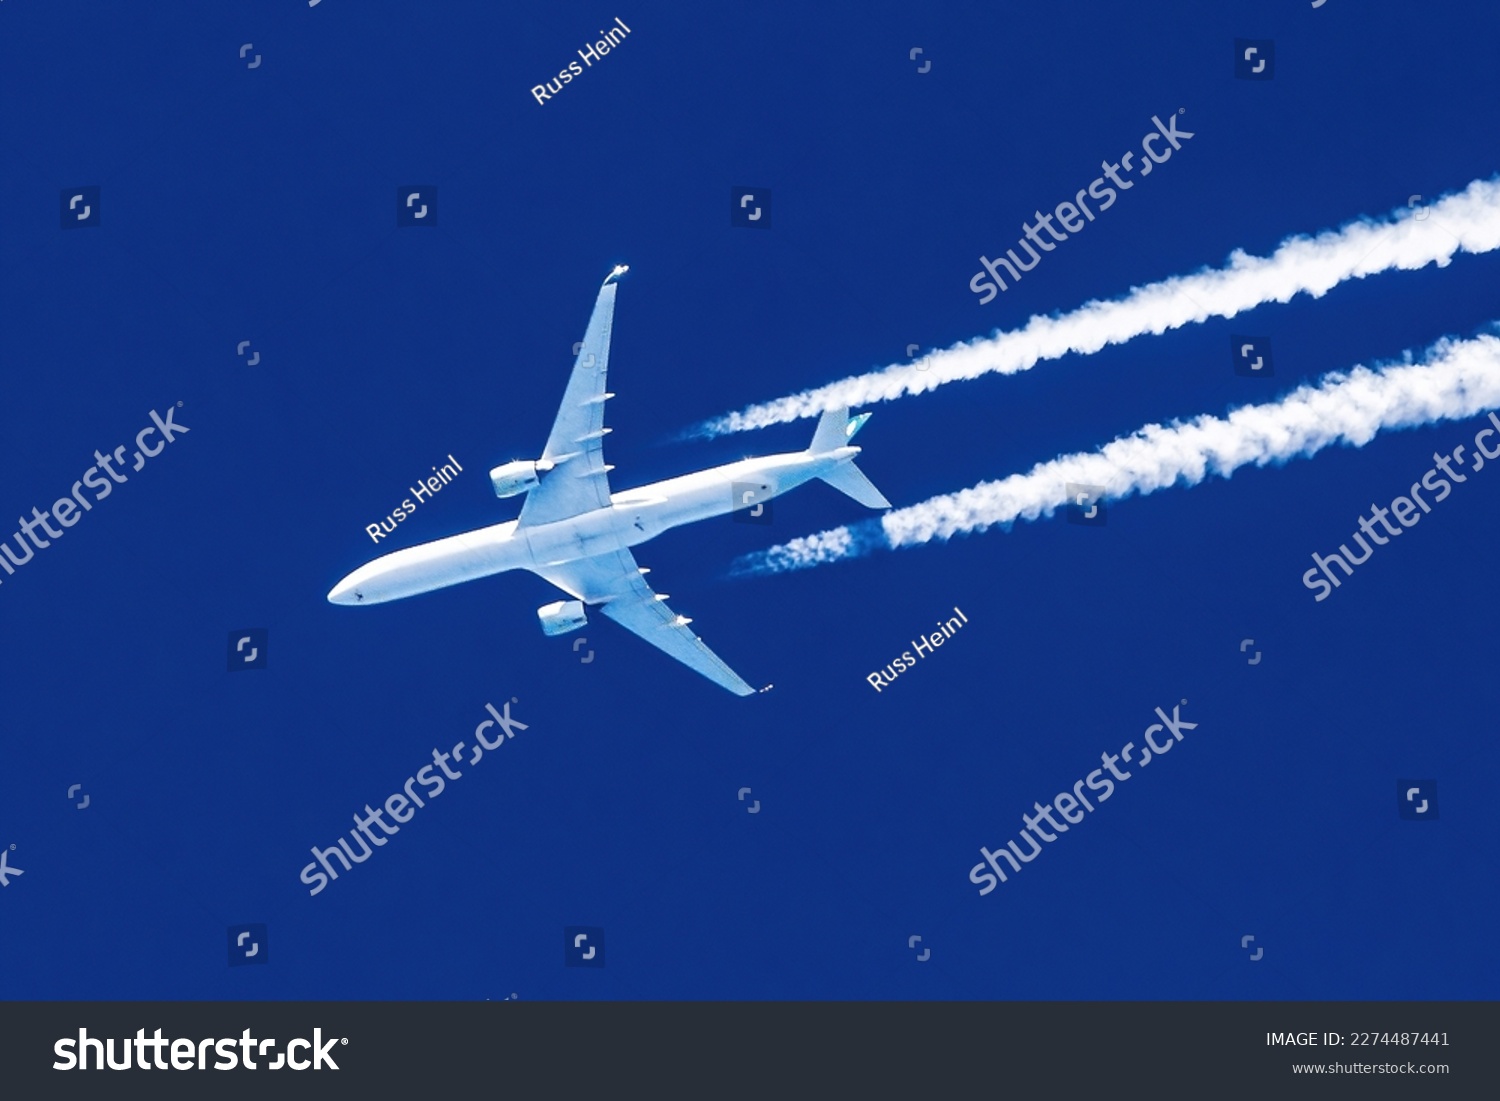 Sharp telephoto close-up of jet plane aircraft with contrails cruising from Hong Kong to New York, altitude AGL 37,000 feet, ground speed 588 knots. #2274487441